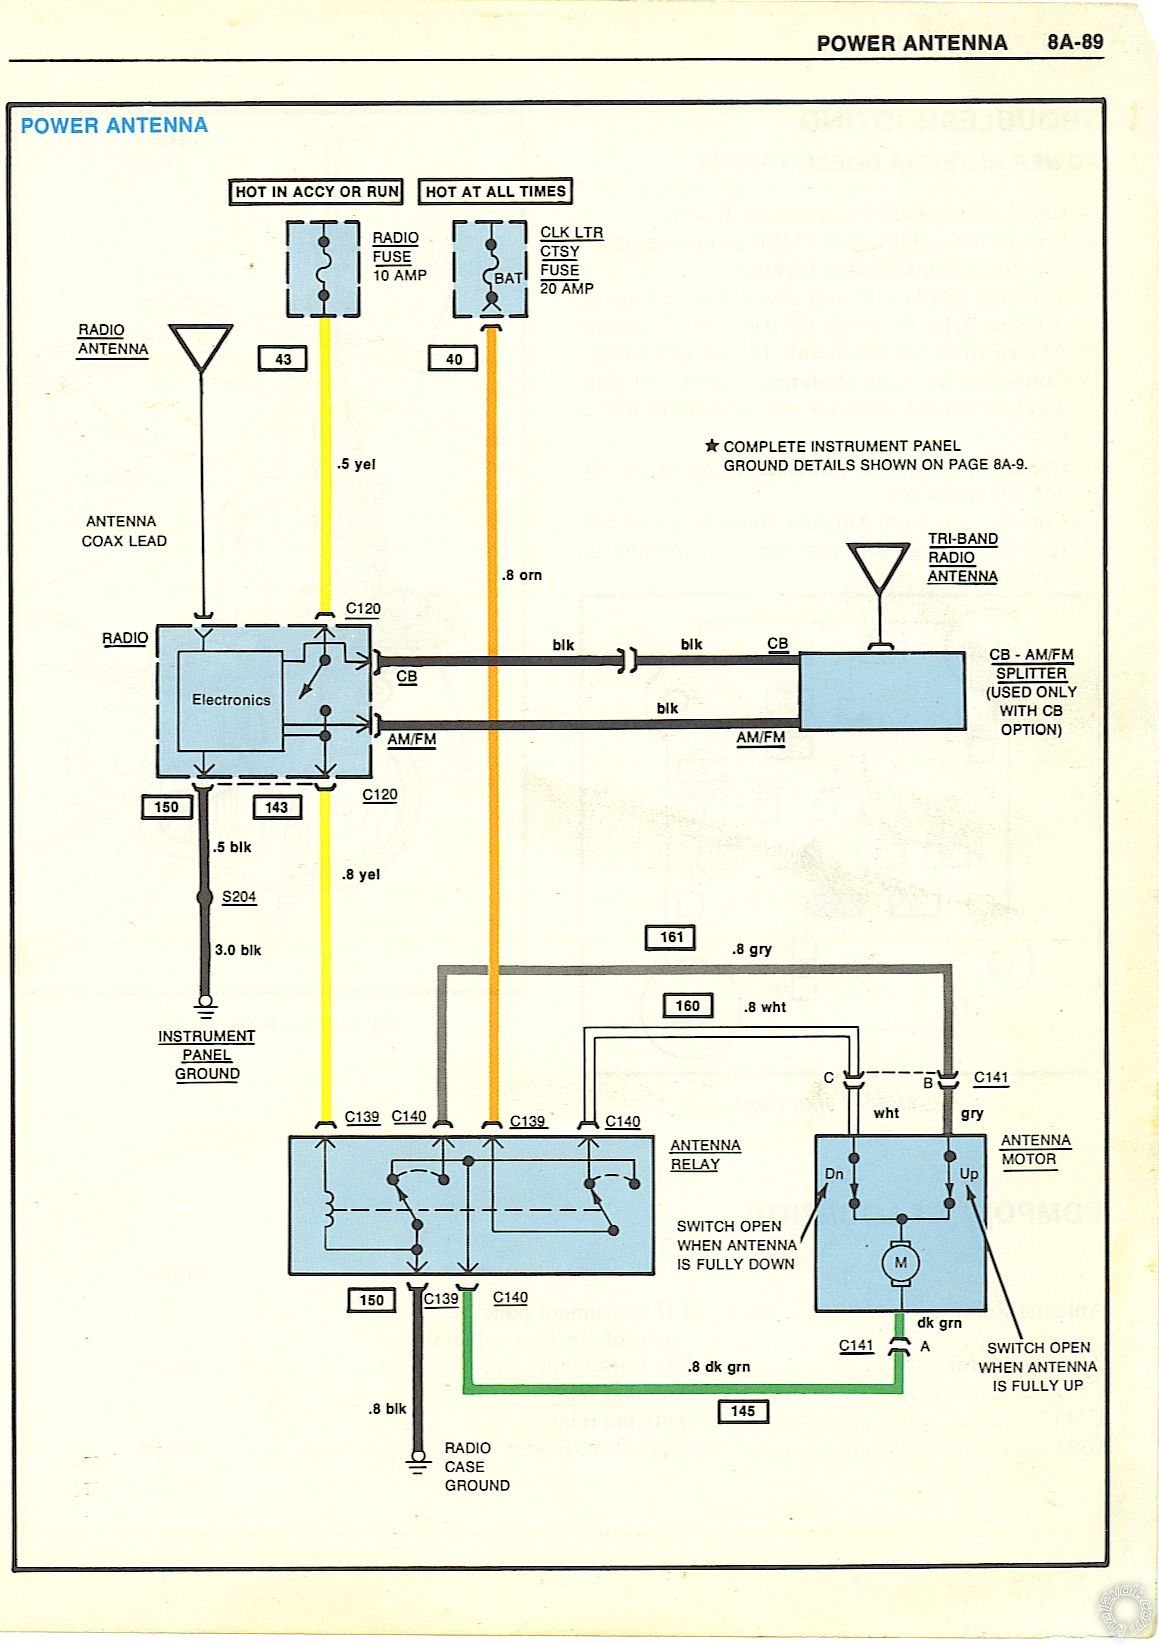 Power Antenna Relay Diagram - Last Post -- posted image.